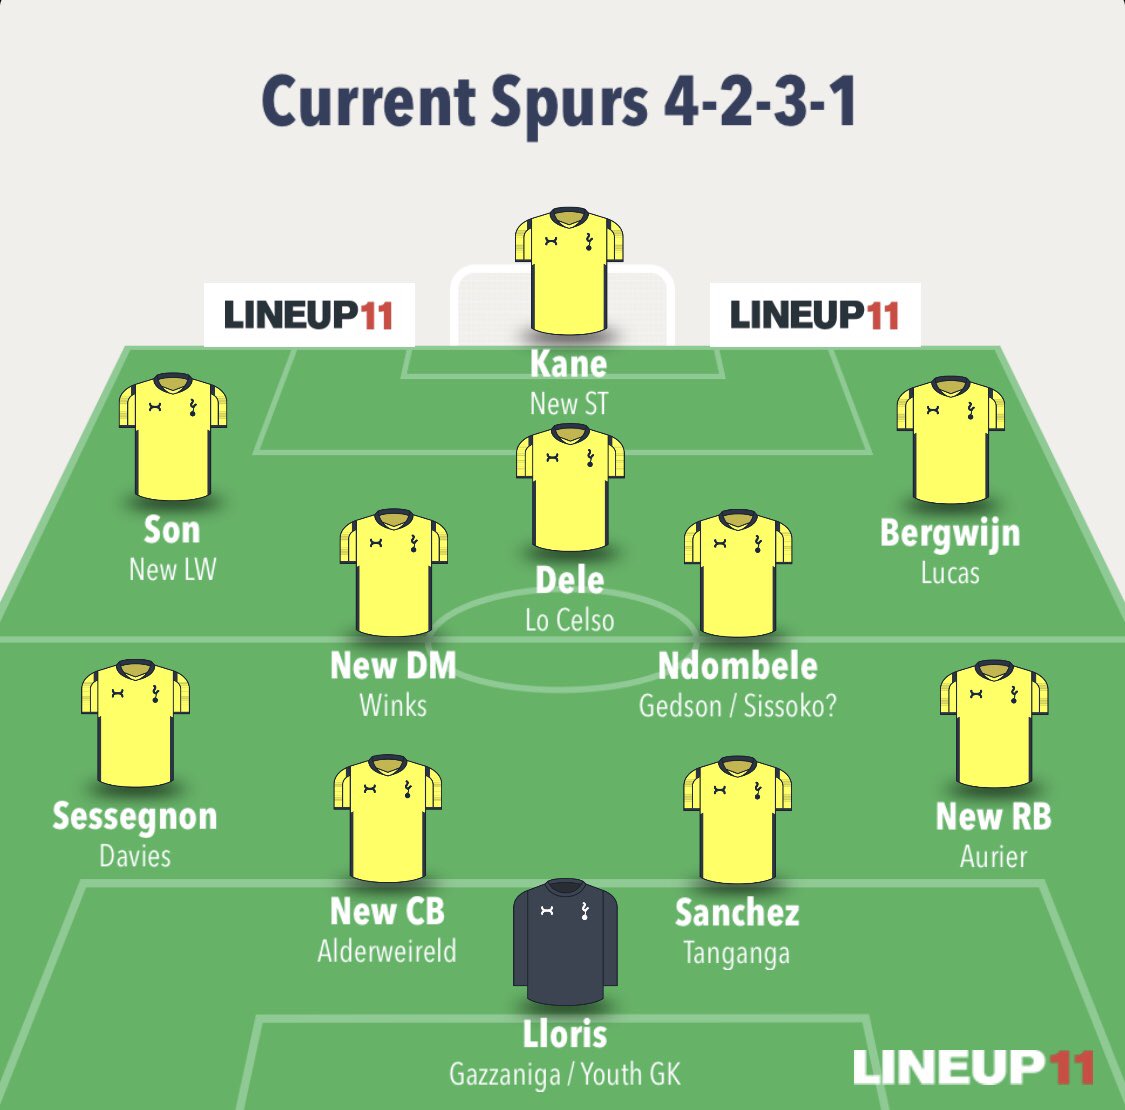 That would leave us with a squad looking like this.